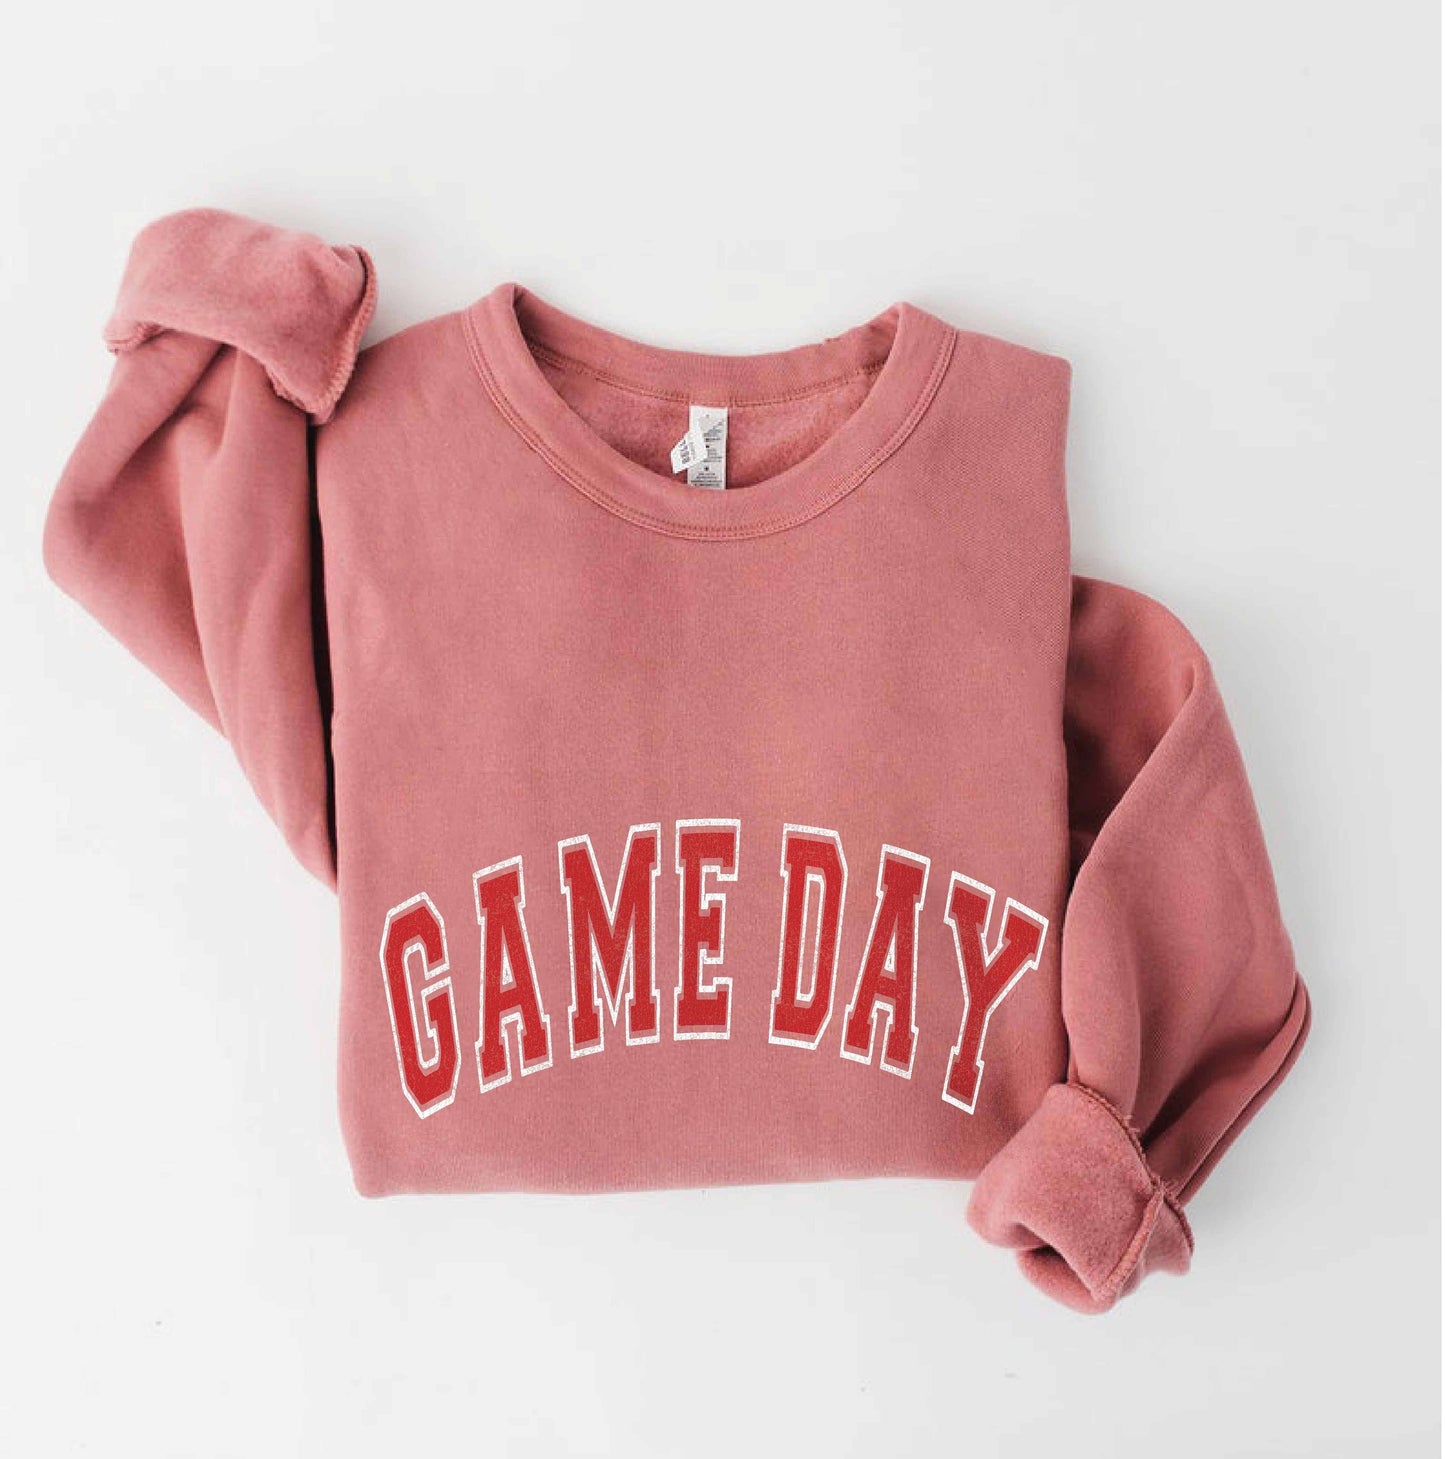 OAT COLLECTIVE - GAME DAY RED Sweatshirt